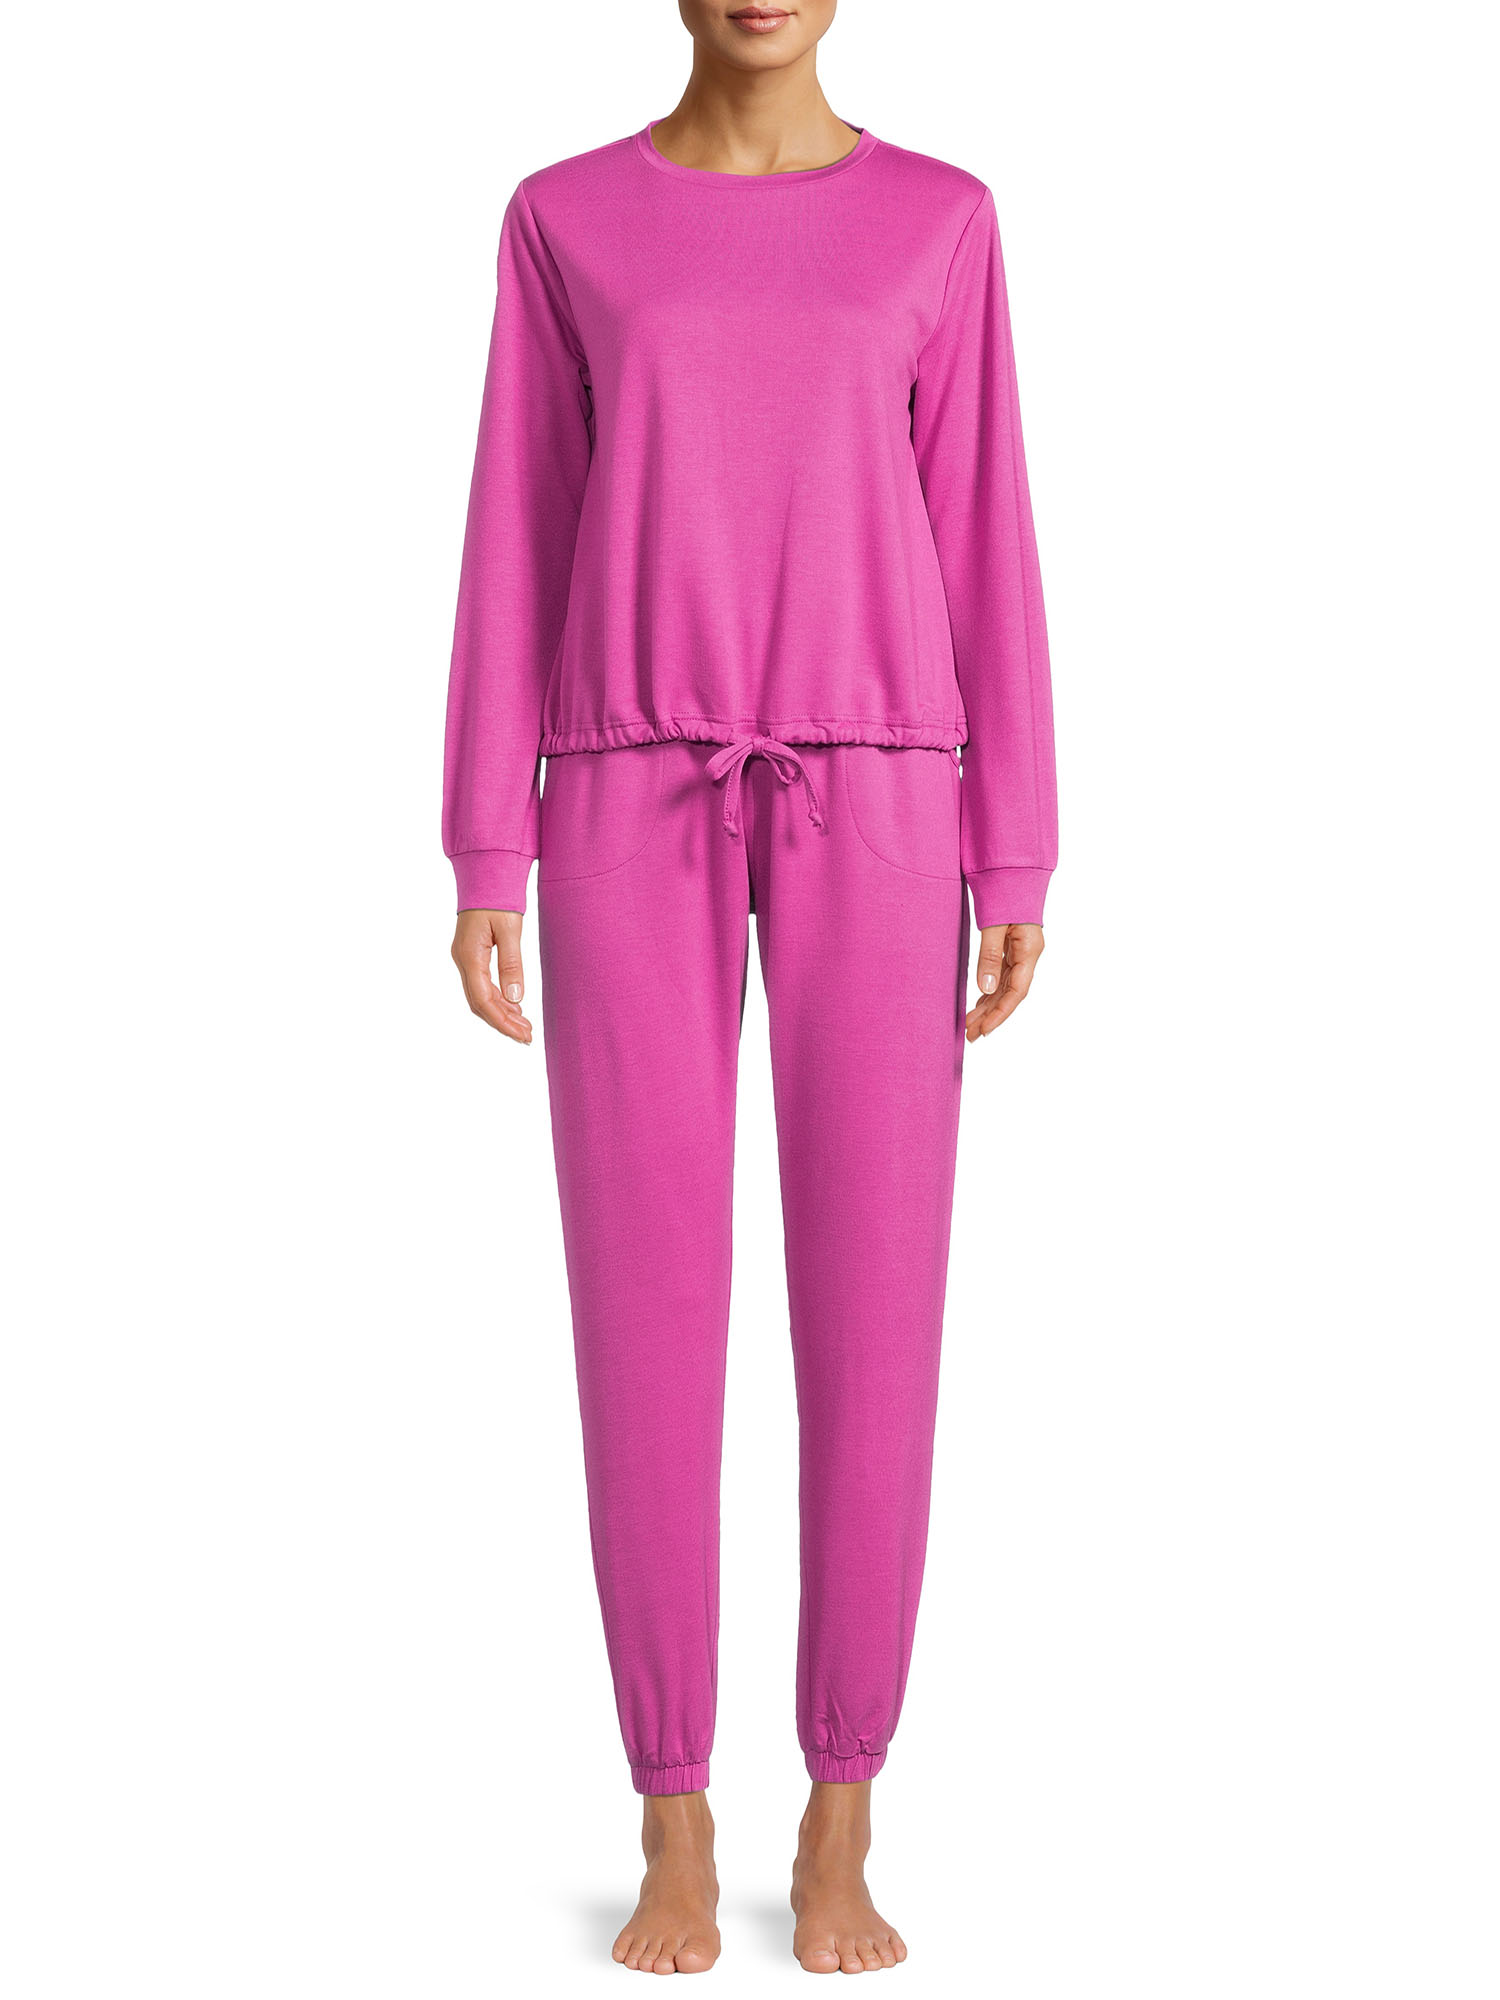 Lissome Women's and Women's Plus L/S French Terry 2-Piece PJ Set - image 1 of 6